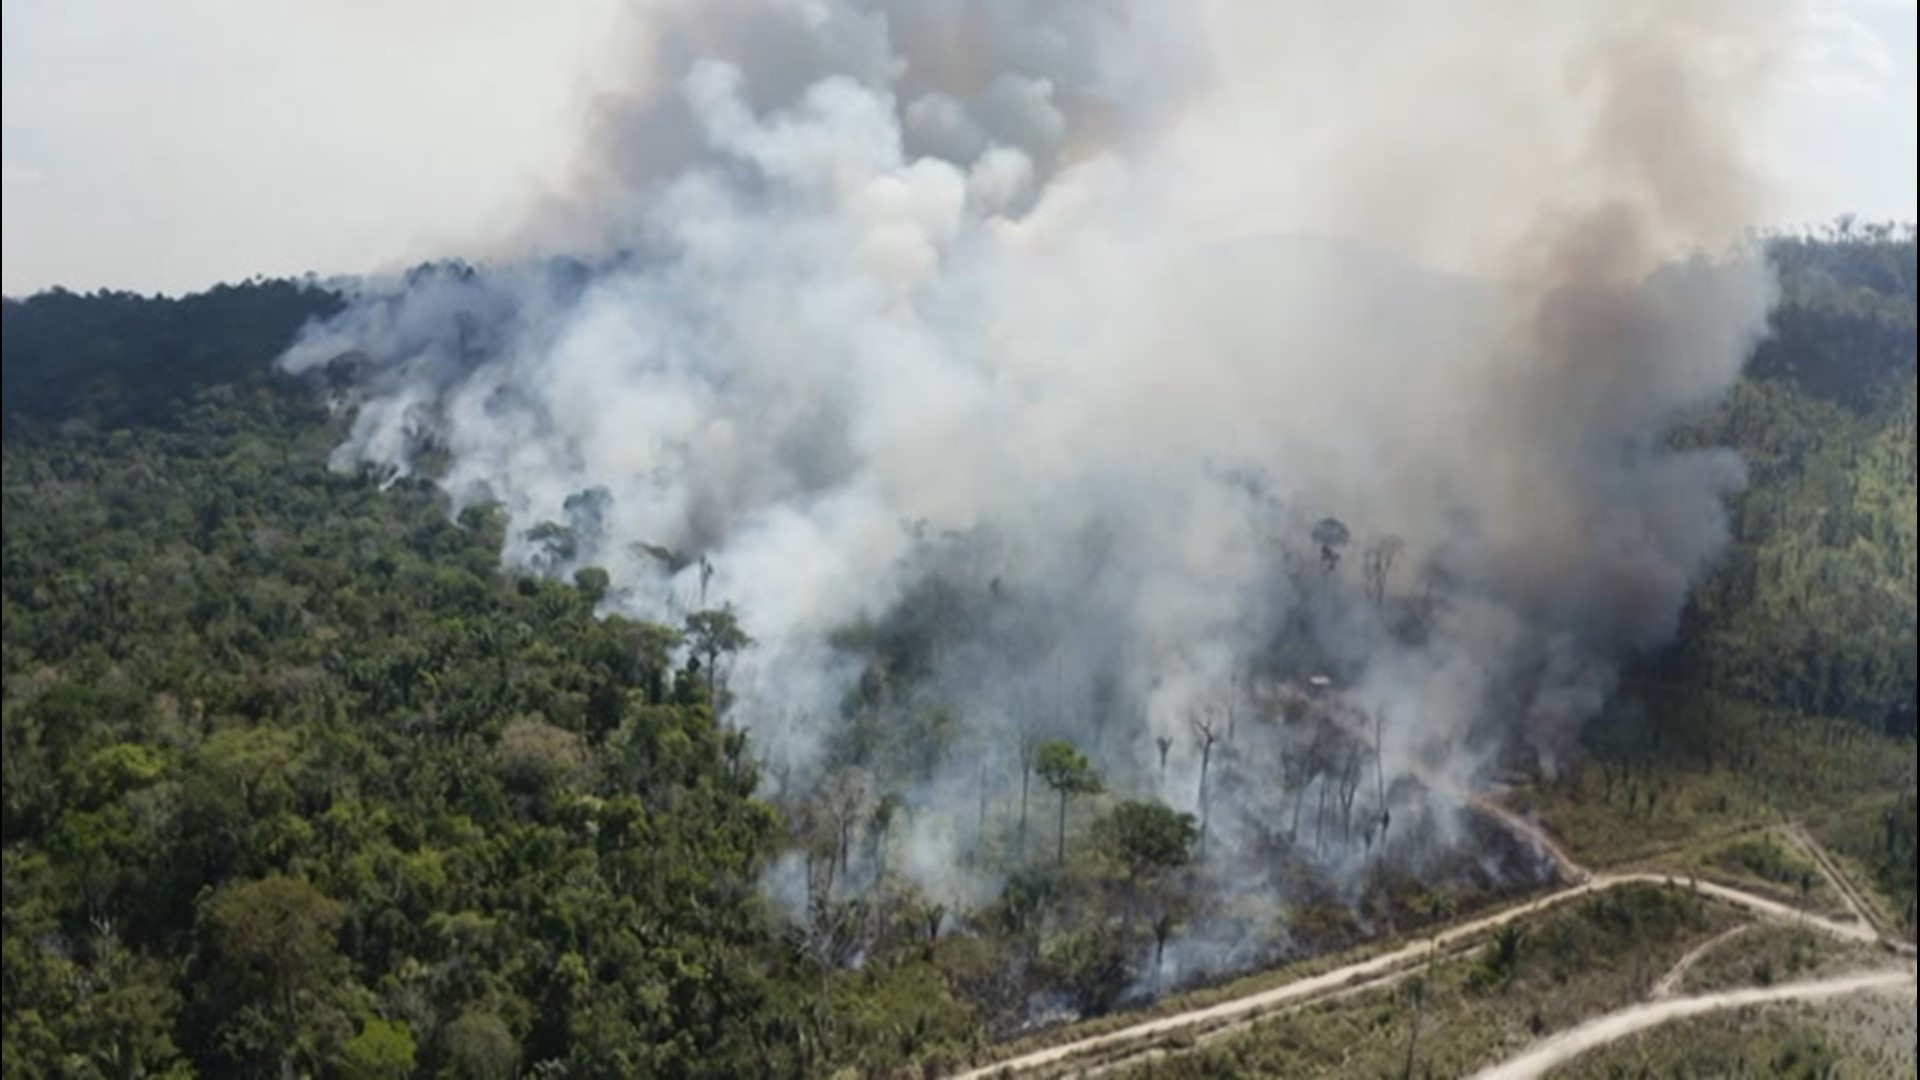 There were more Brazilian wildfires in 2020 than any year in the last decade, with 2020 seeing a 12.7% increase in fire activity.